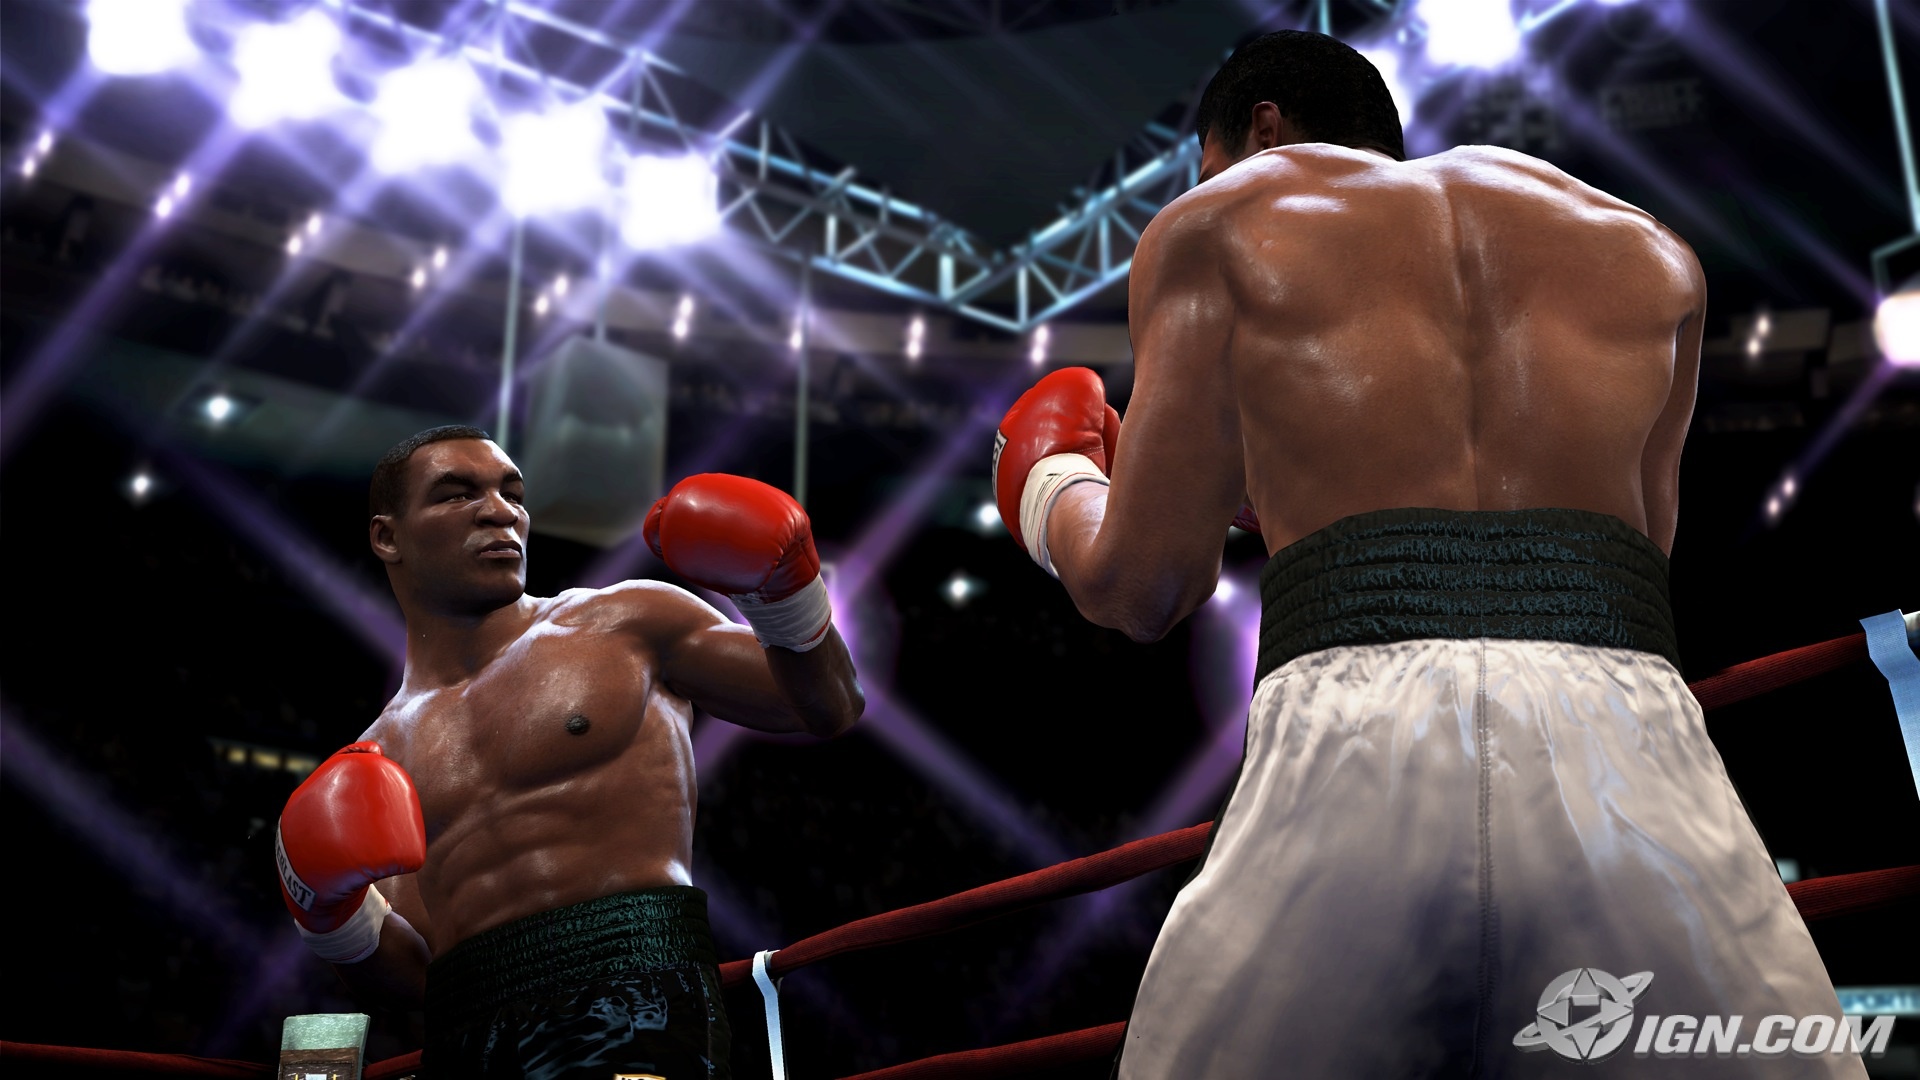 Untilited boxing game. Fight Night Round 4. Fight Night Round 4 Тайсон. Fight Night 4 игра. Fight Night Round 4 (ps3).